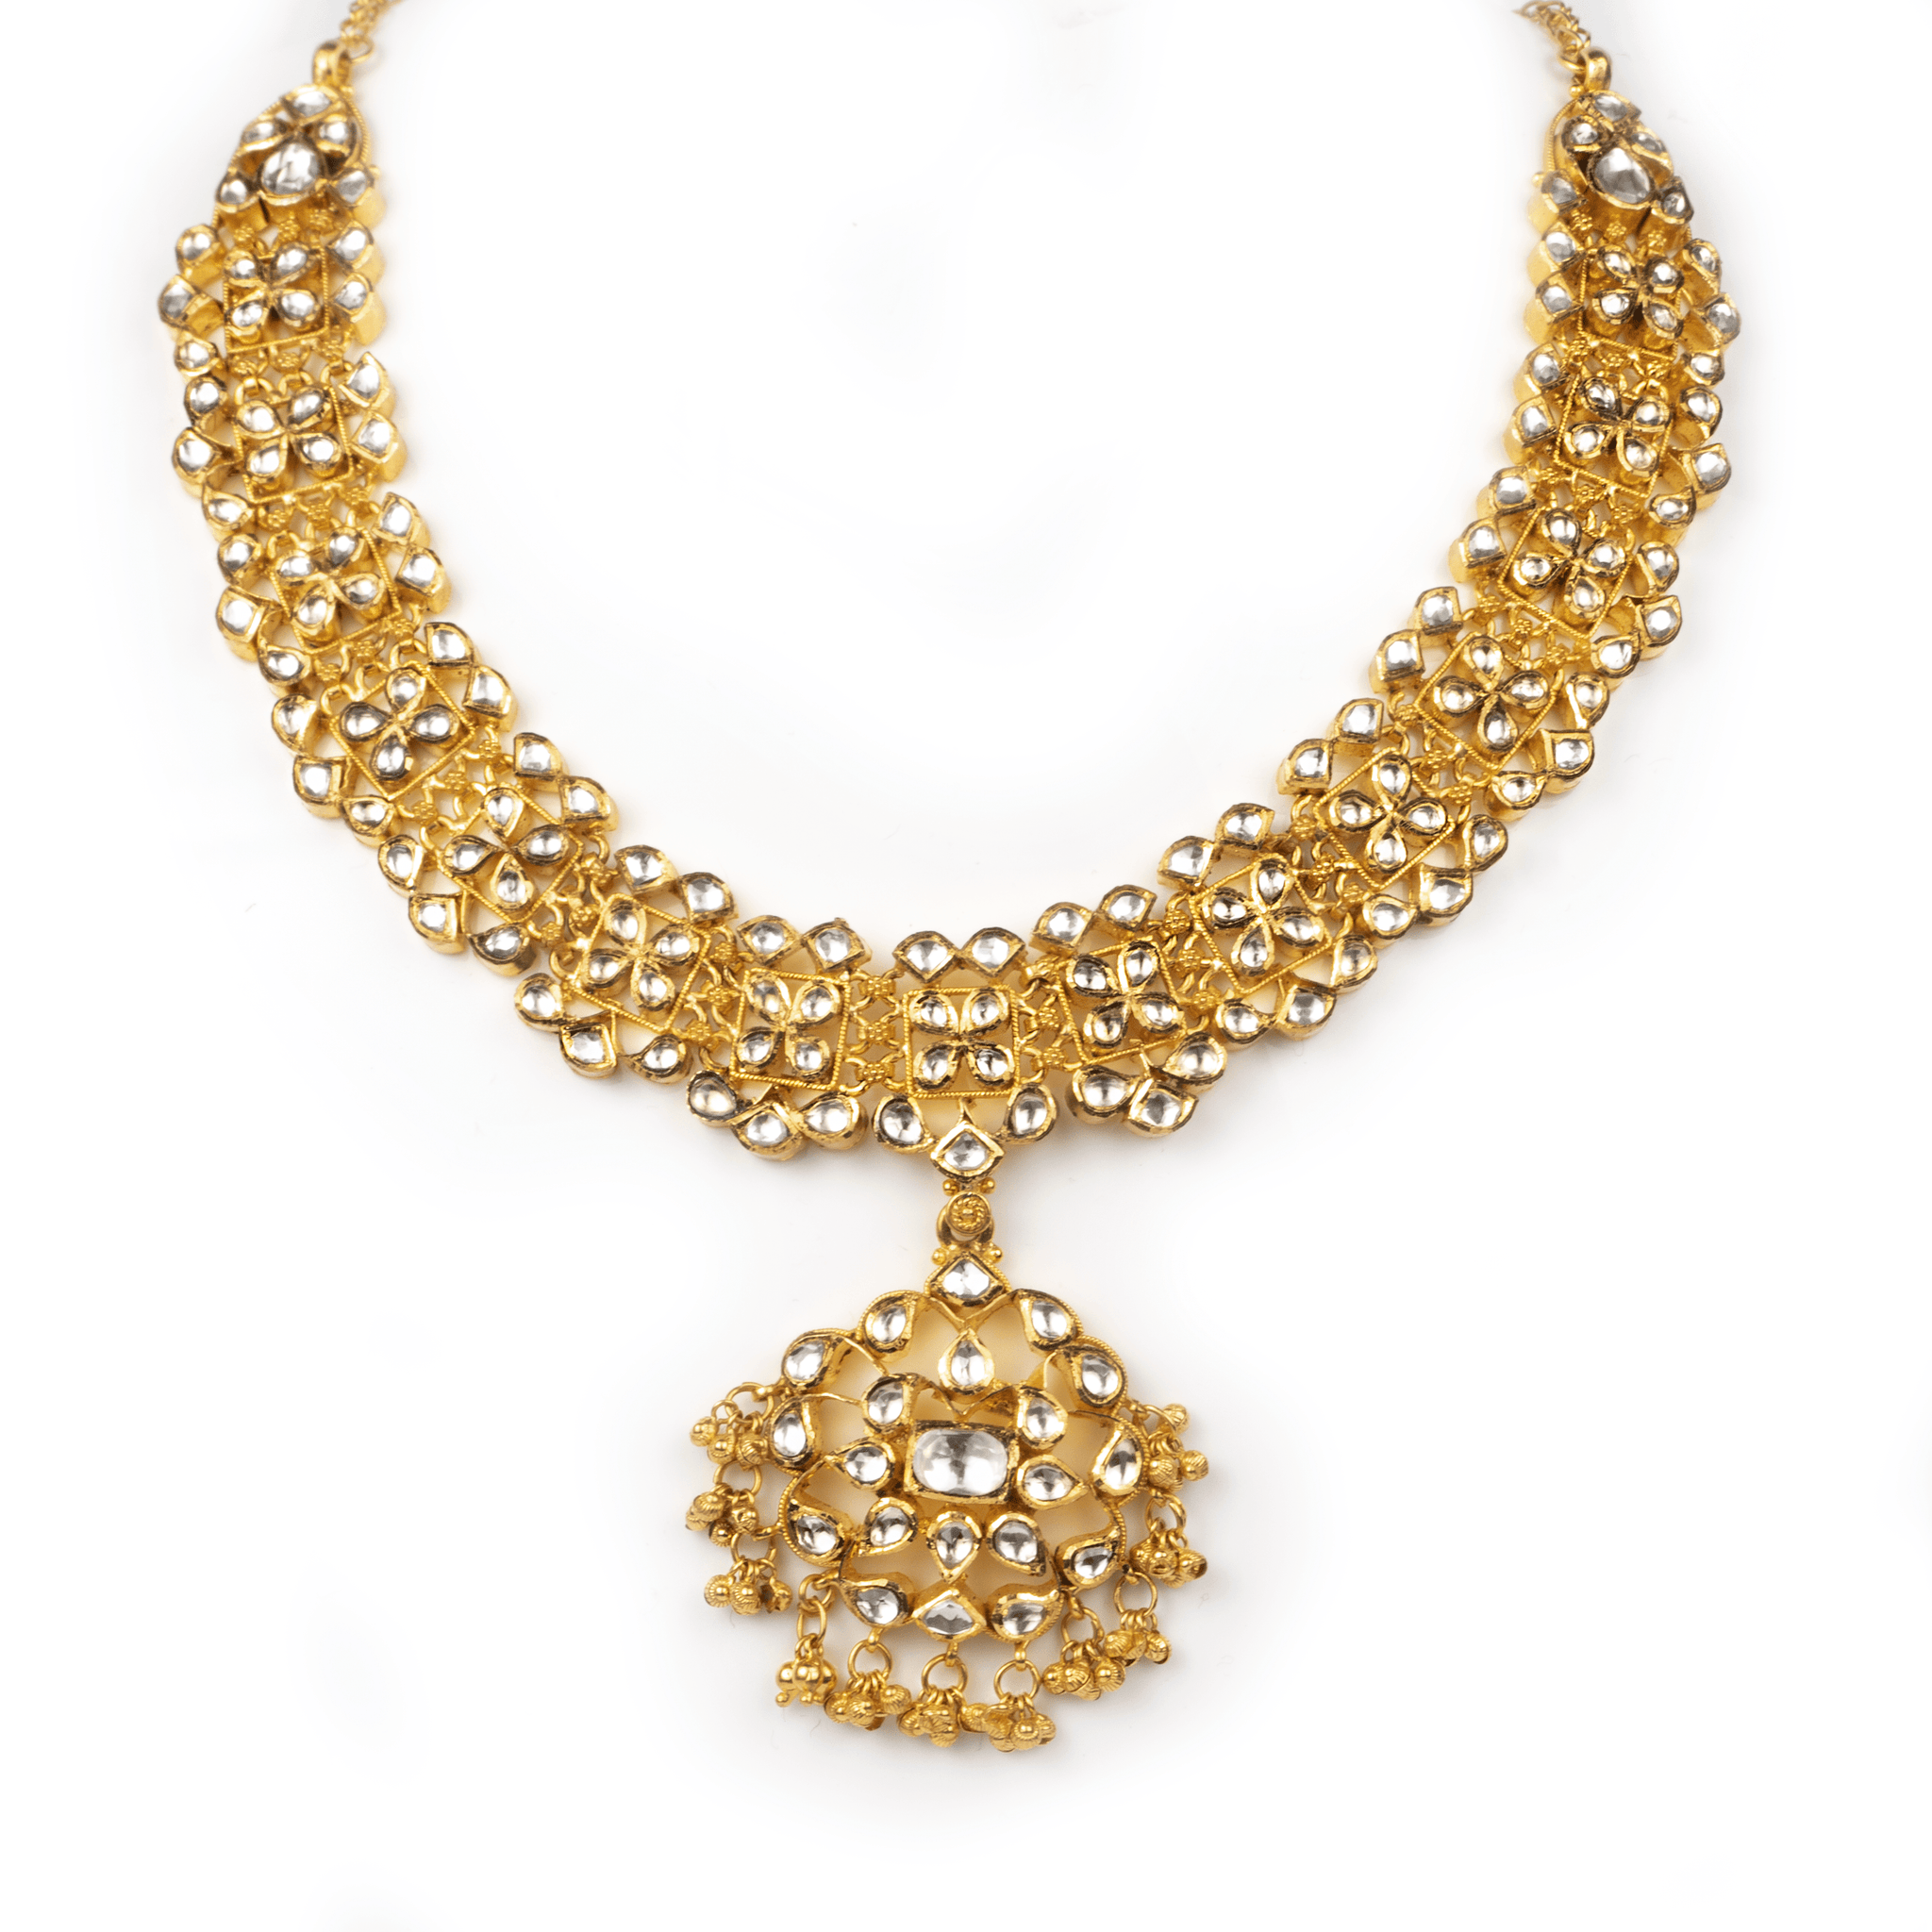 22ct Gold Antiquated Look Necklace and Earrings set with Cubic Zirconia stones (120.7g) N&E-5921